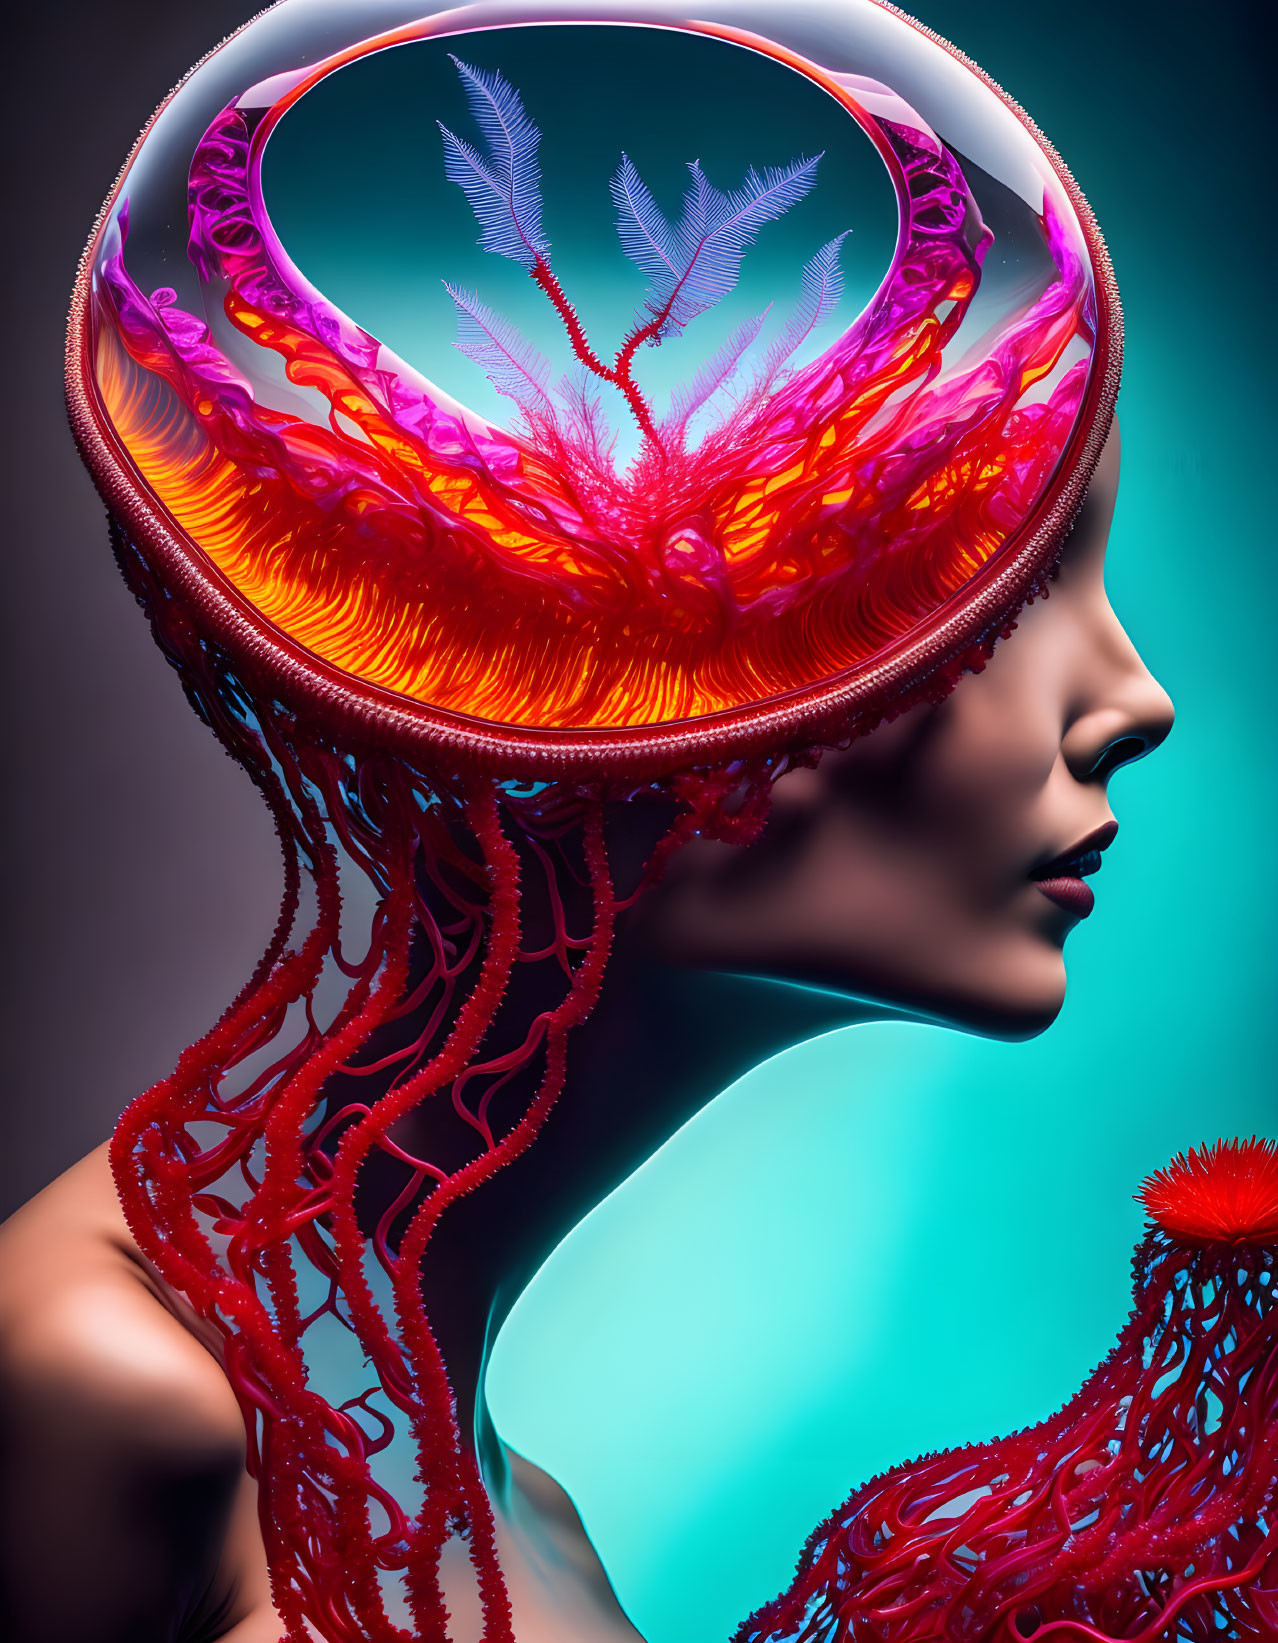 Vibrant surreal portrait with jellyfish-like headdress on teal background